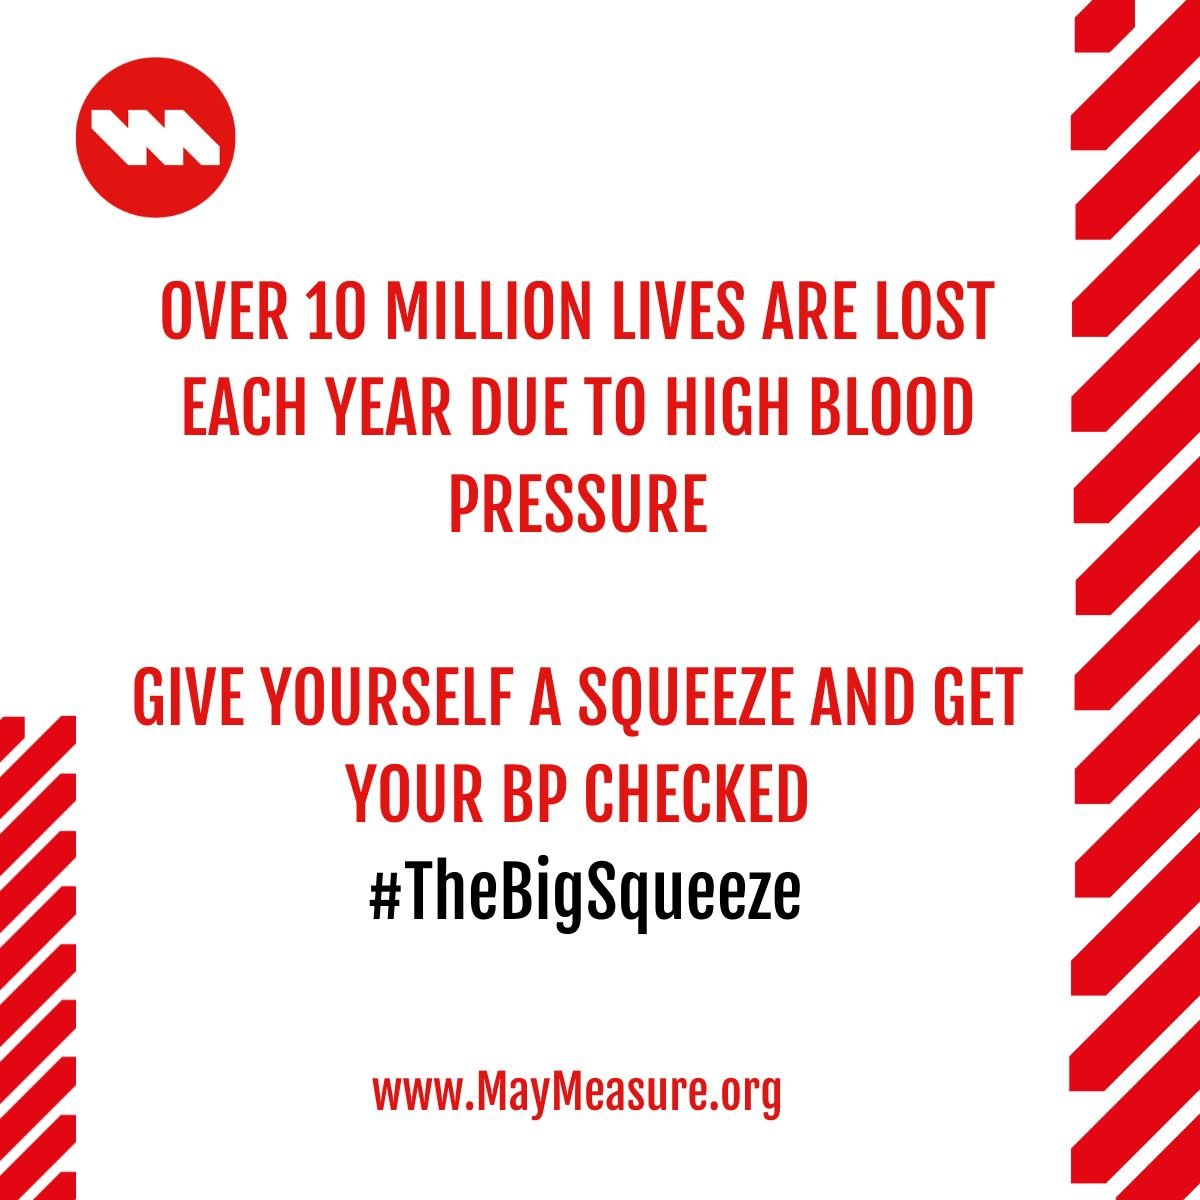 It's May 1st which means it's the start of May Measurement Month! 🎉
We are encouraging everyone to get their blood pressure checked.❤️
Visit hubs.la/Q02vtVbv0 to learn more and get involved. 

#MayMeasurementMonth #HypertensionAwareness #HealthIsWealth #TheBigSqueeze